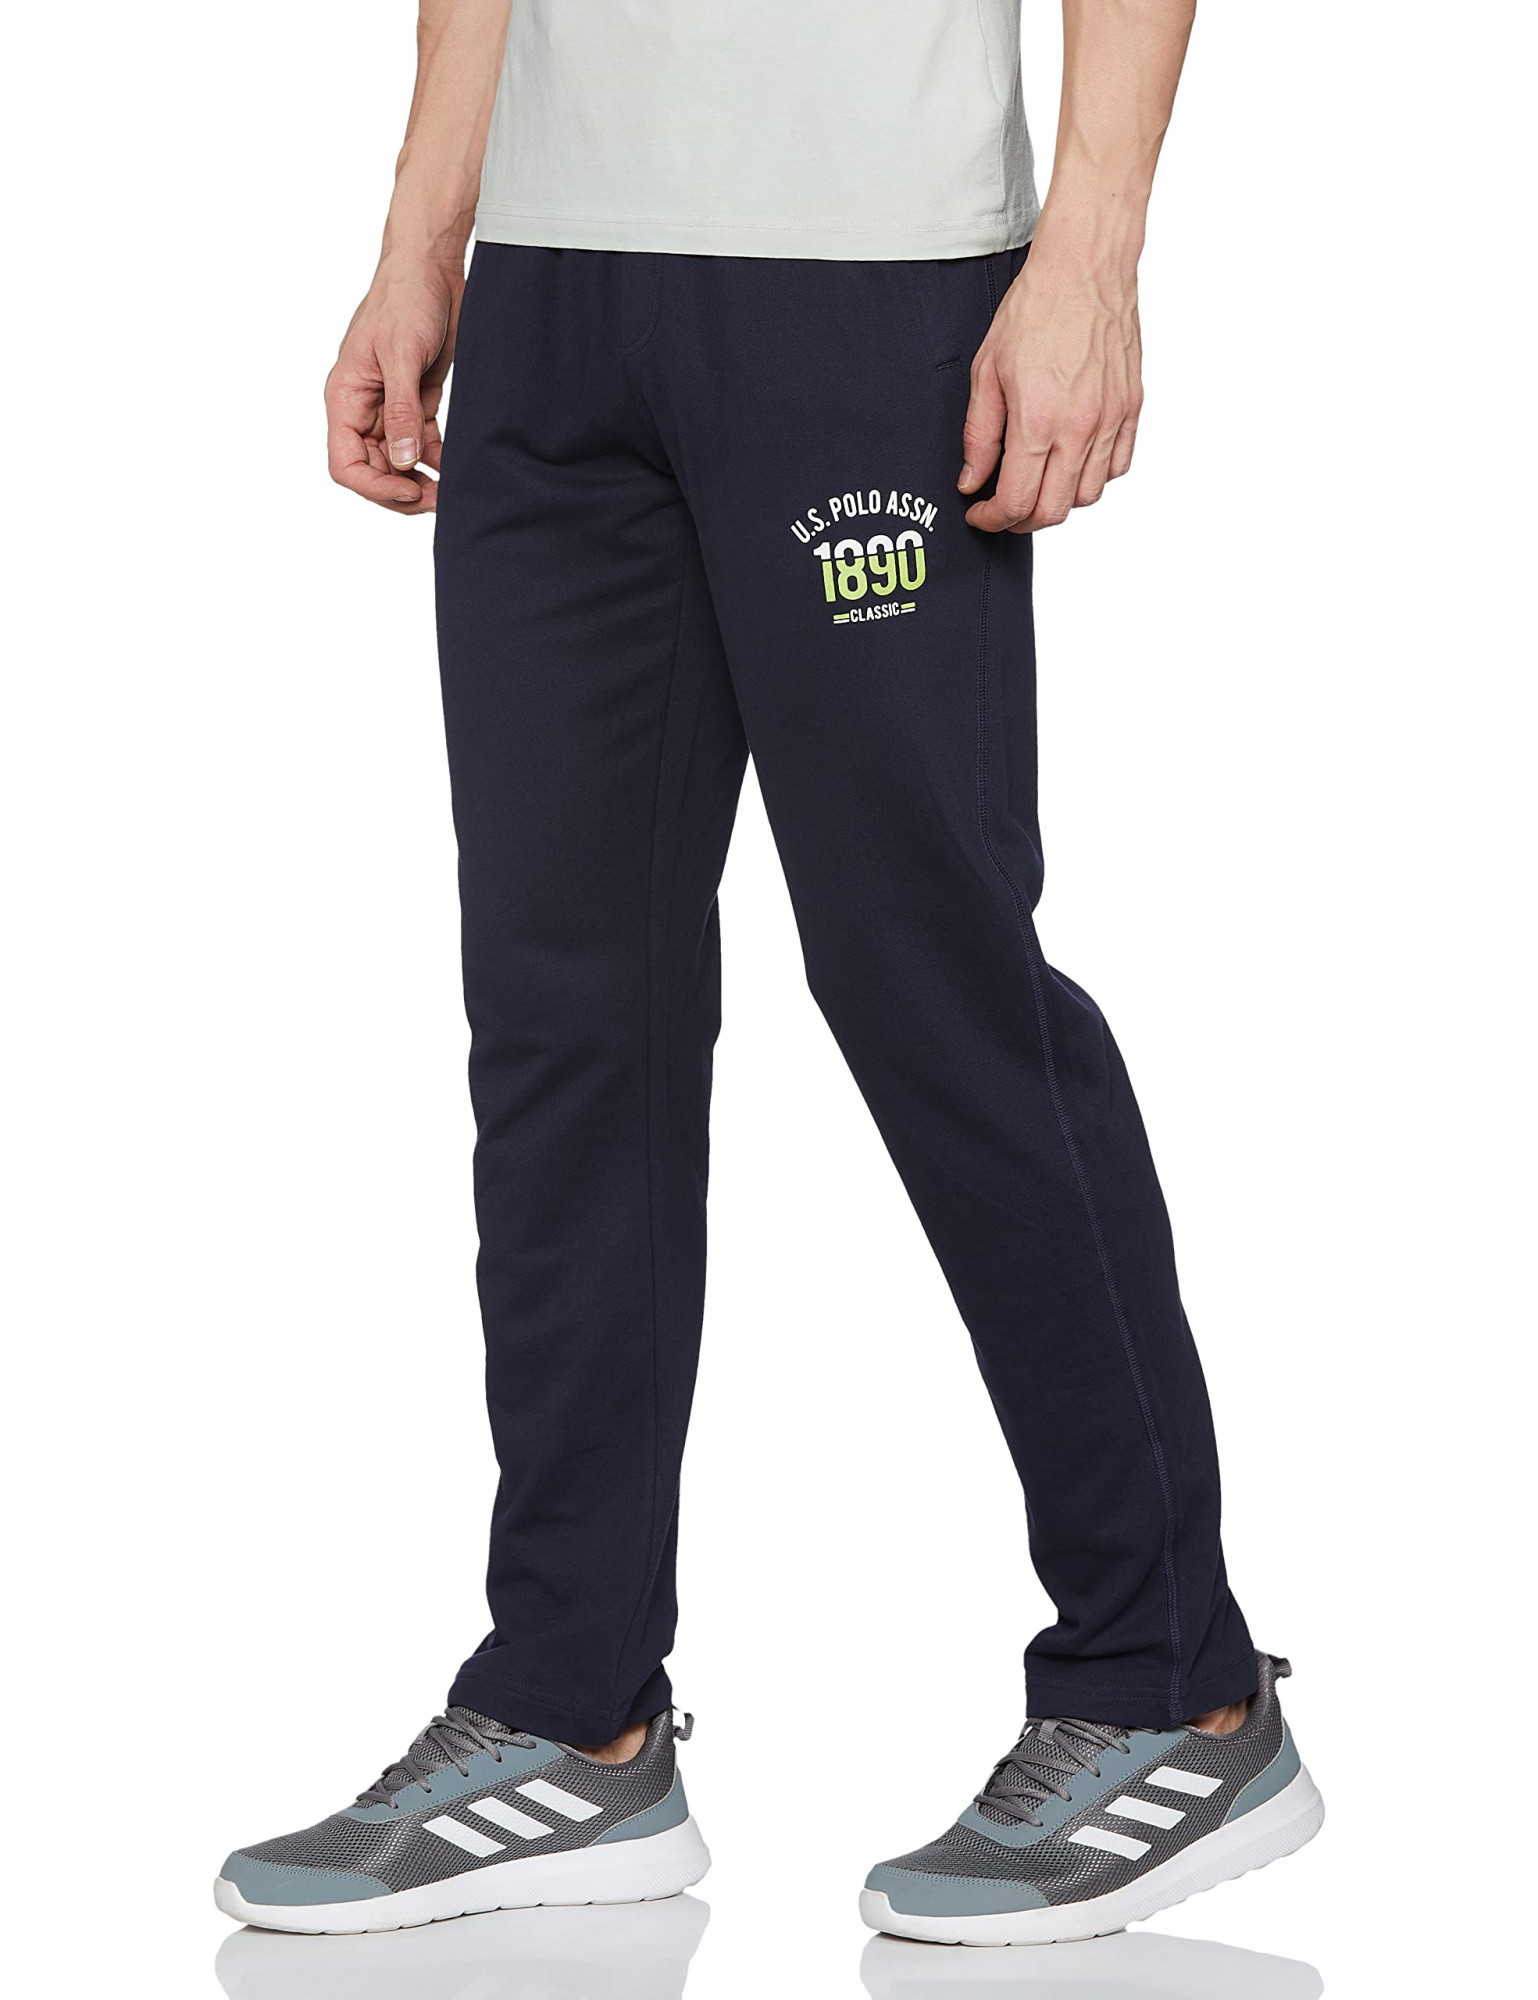 U.S. POLO ASSN. Sweatpants LIGHTWEIGHT joggers grey track pants Navy  stripes L | Clothes design, Navy stripes, Outfit inspo